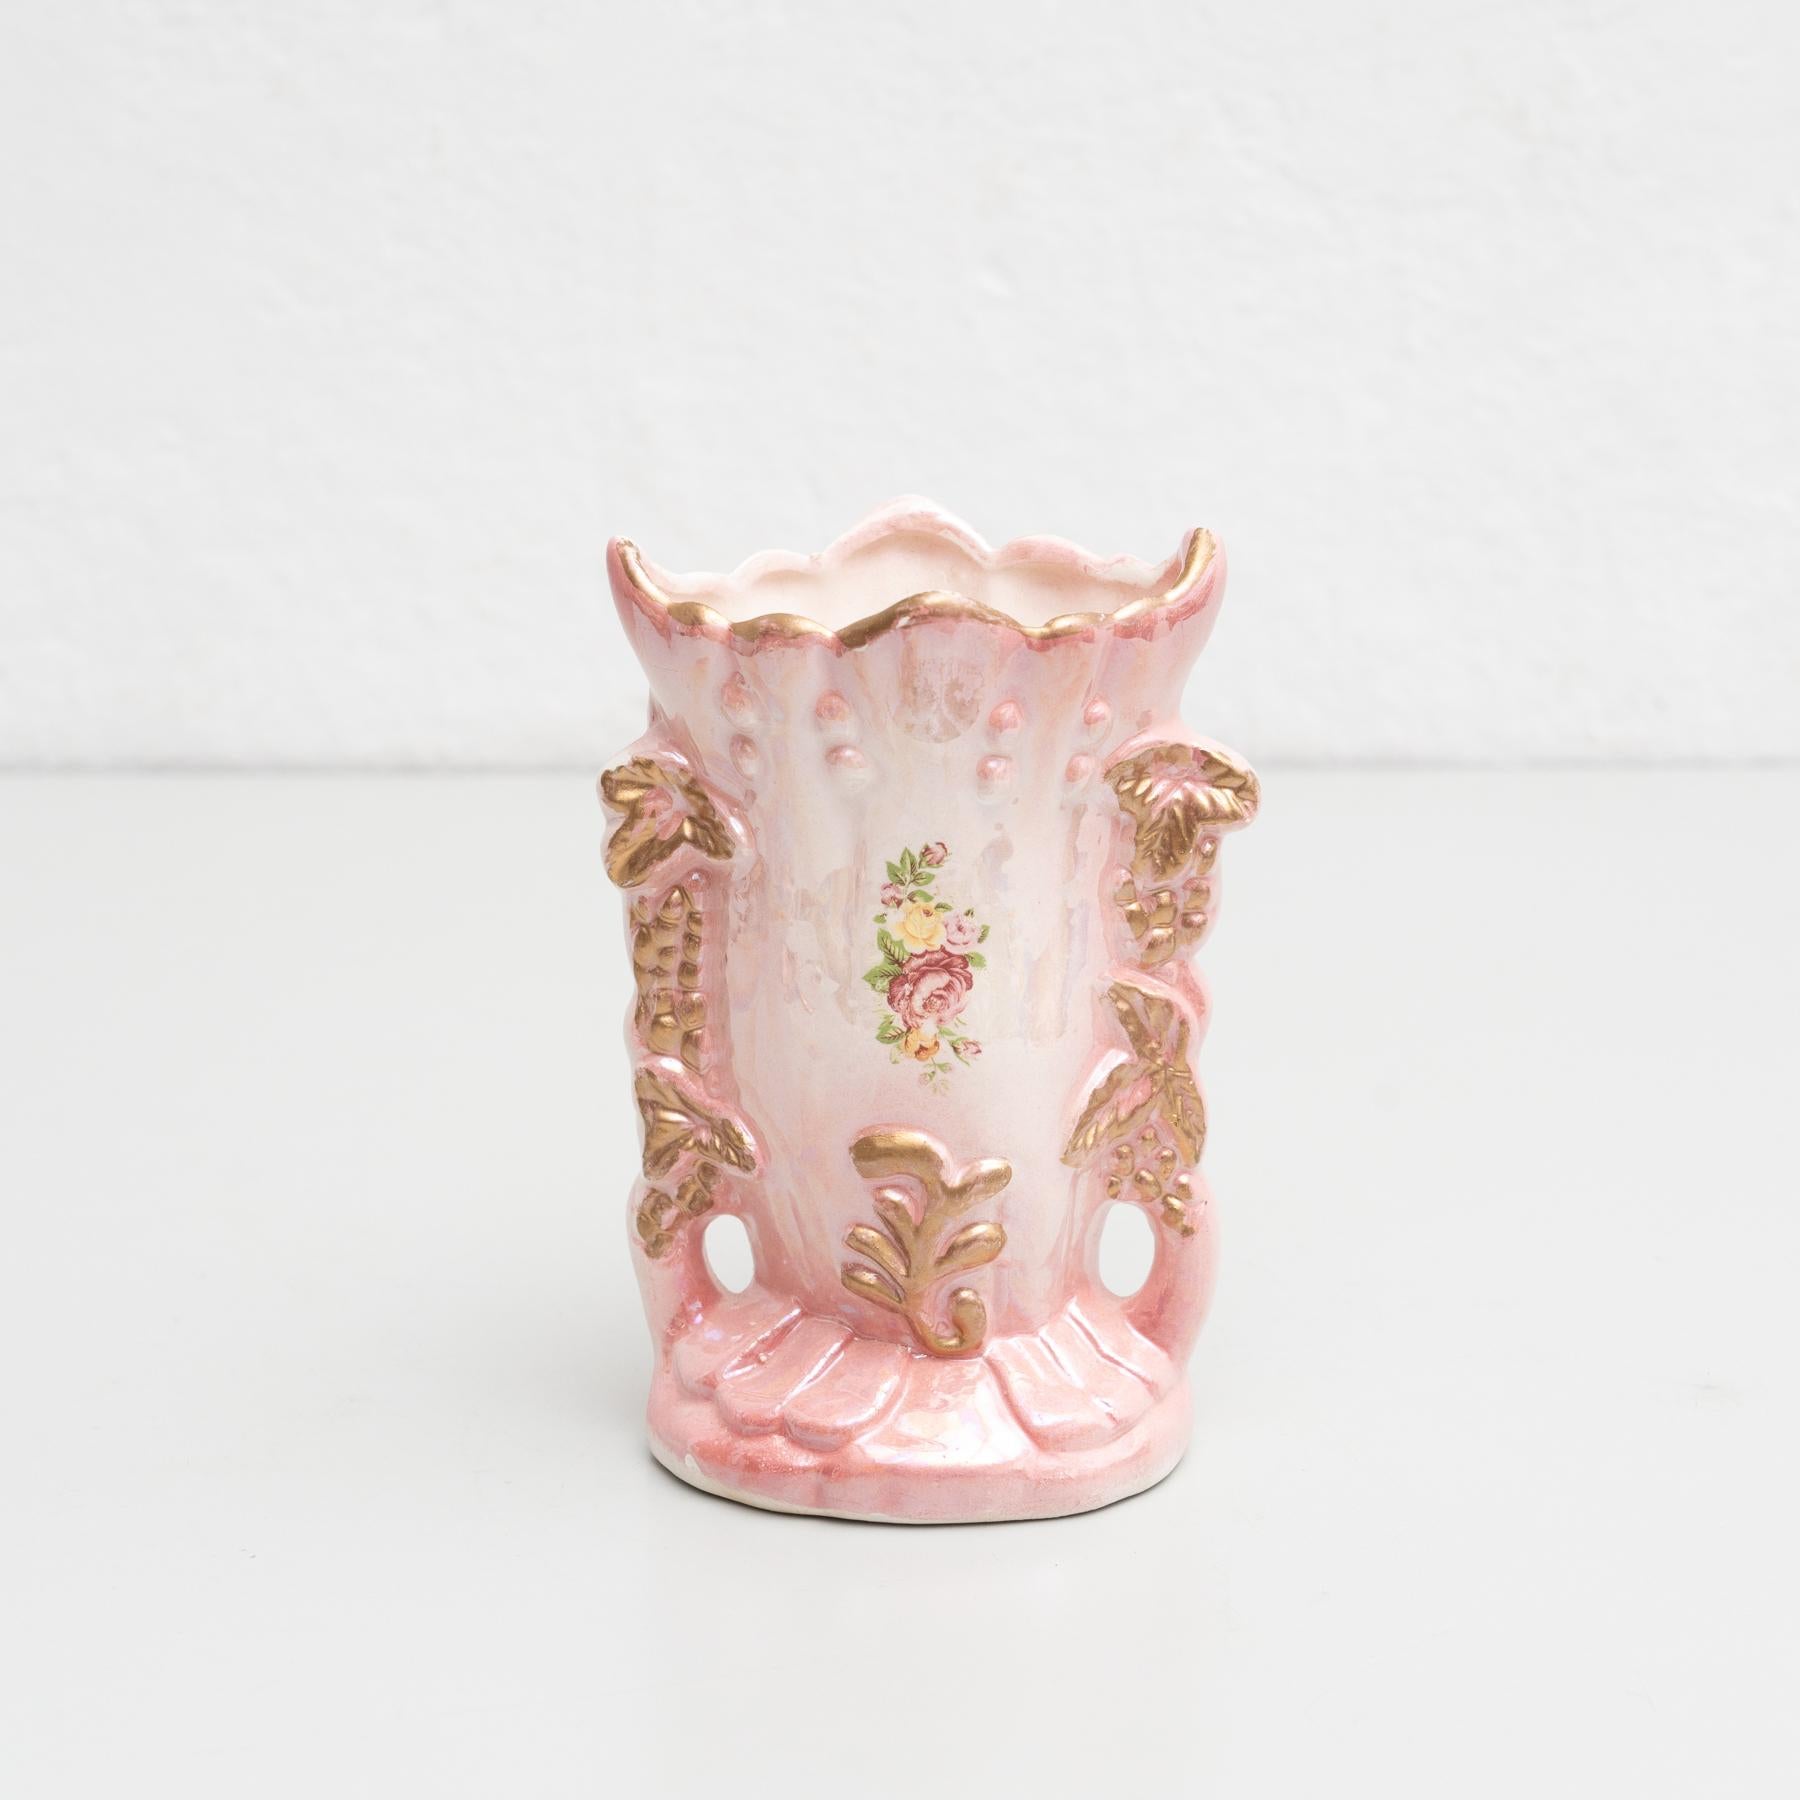 Isabelline hand-painted porcelain vase in the Serves style. 

Made by unknown manufacturer in Spain, circa 19th Century.

In original condition, with minor wear consistent with age and use, preserving a beautiful